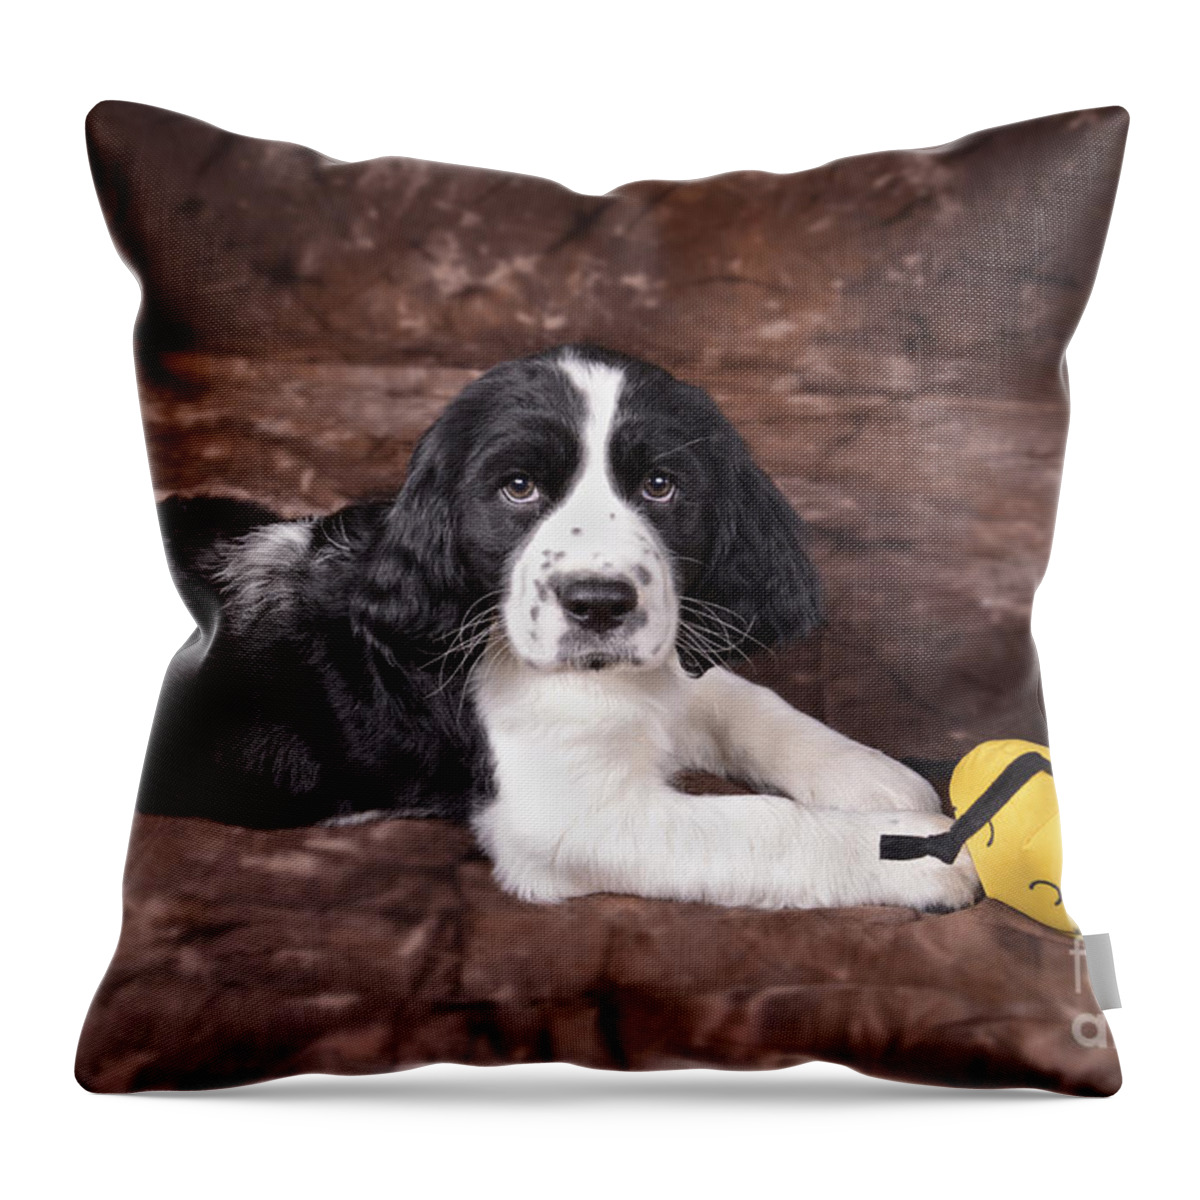  Throw Pillow featuring the photograph Alfred by Alana Ranney